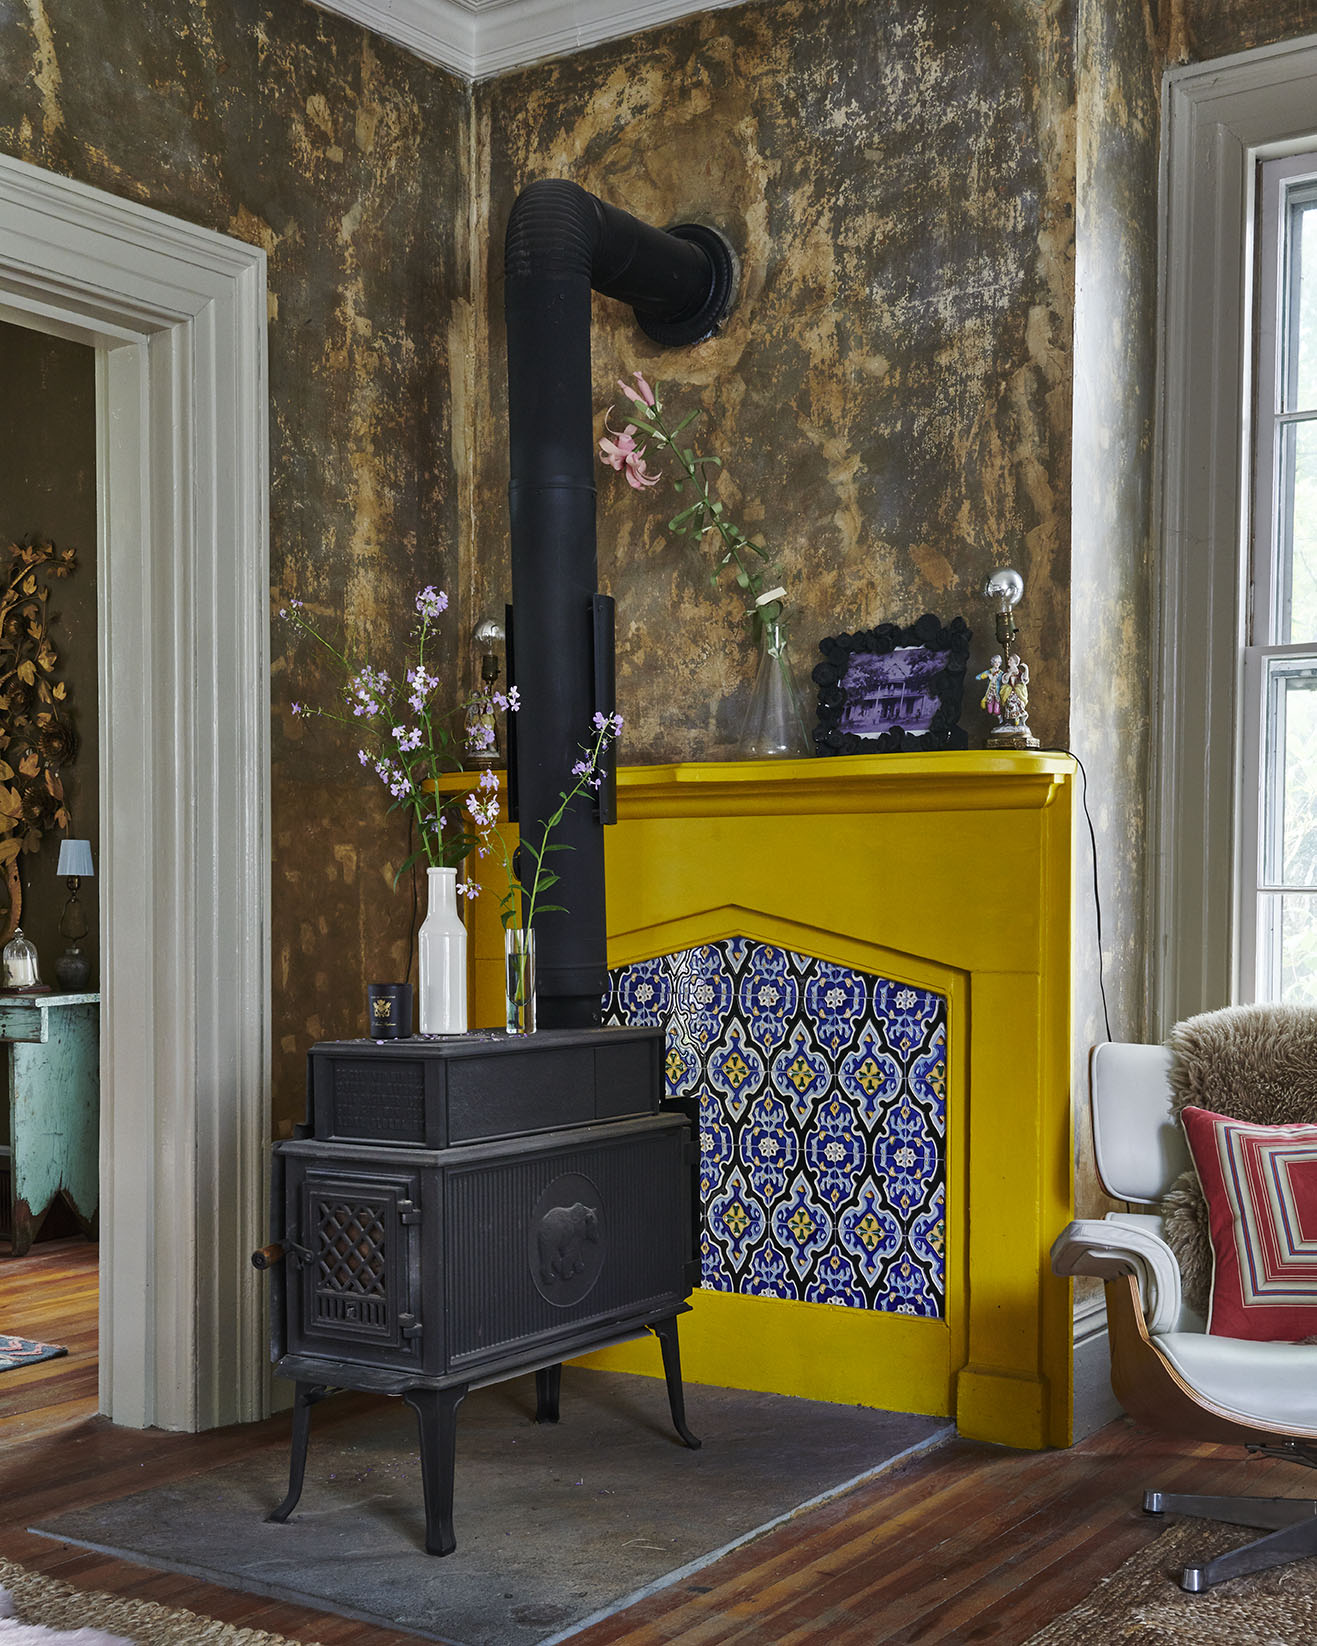 wood burning stove in yellow room in MartinBourne Home by Alison Gootee Photography